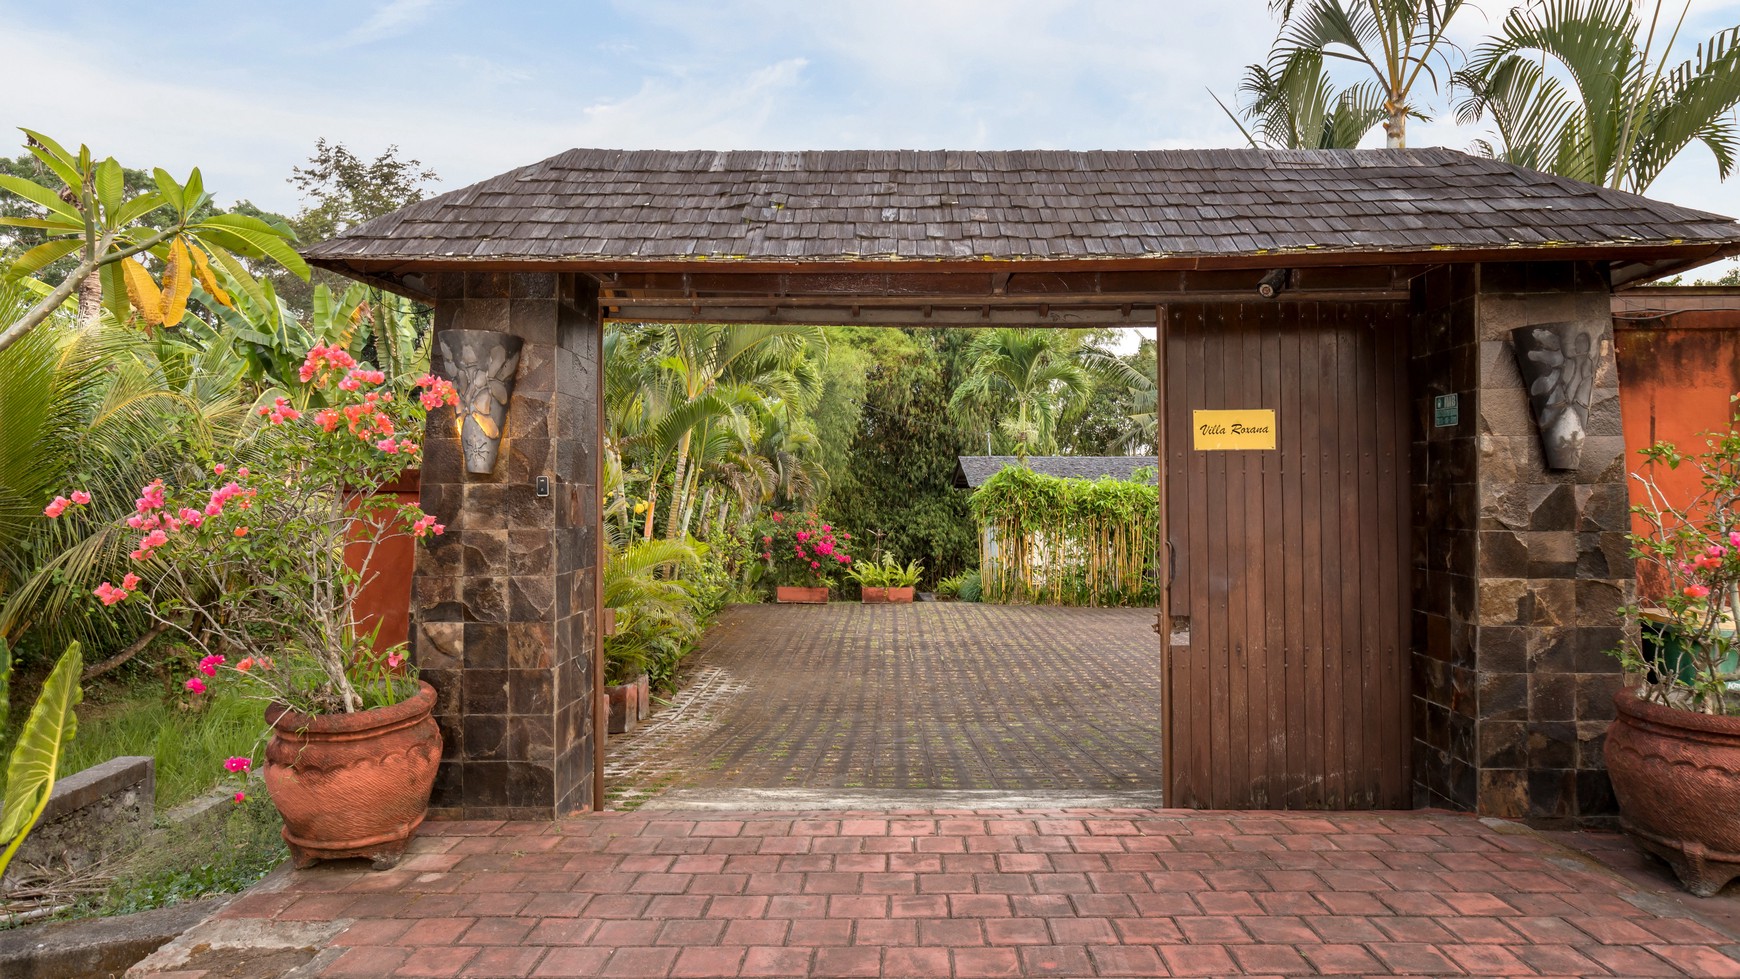 Villa for rent, very amazing, captivating, and unique in the Nyanyi area